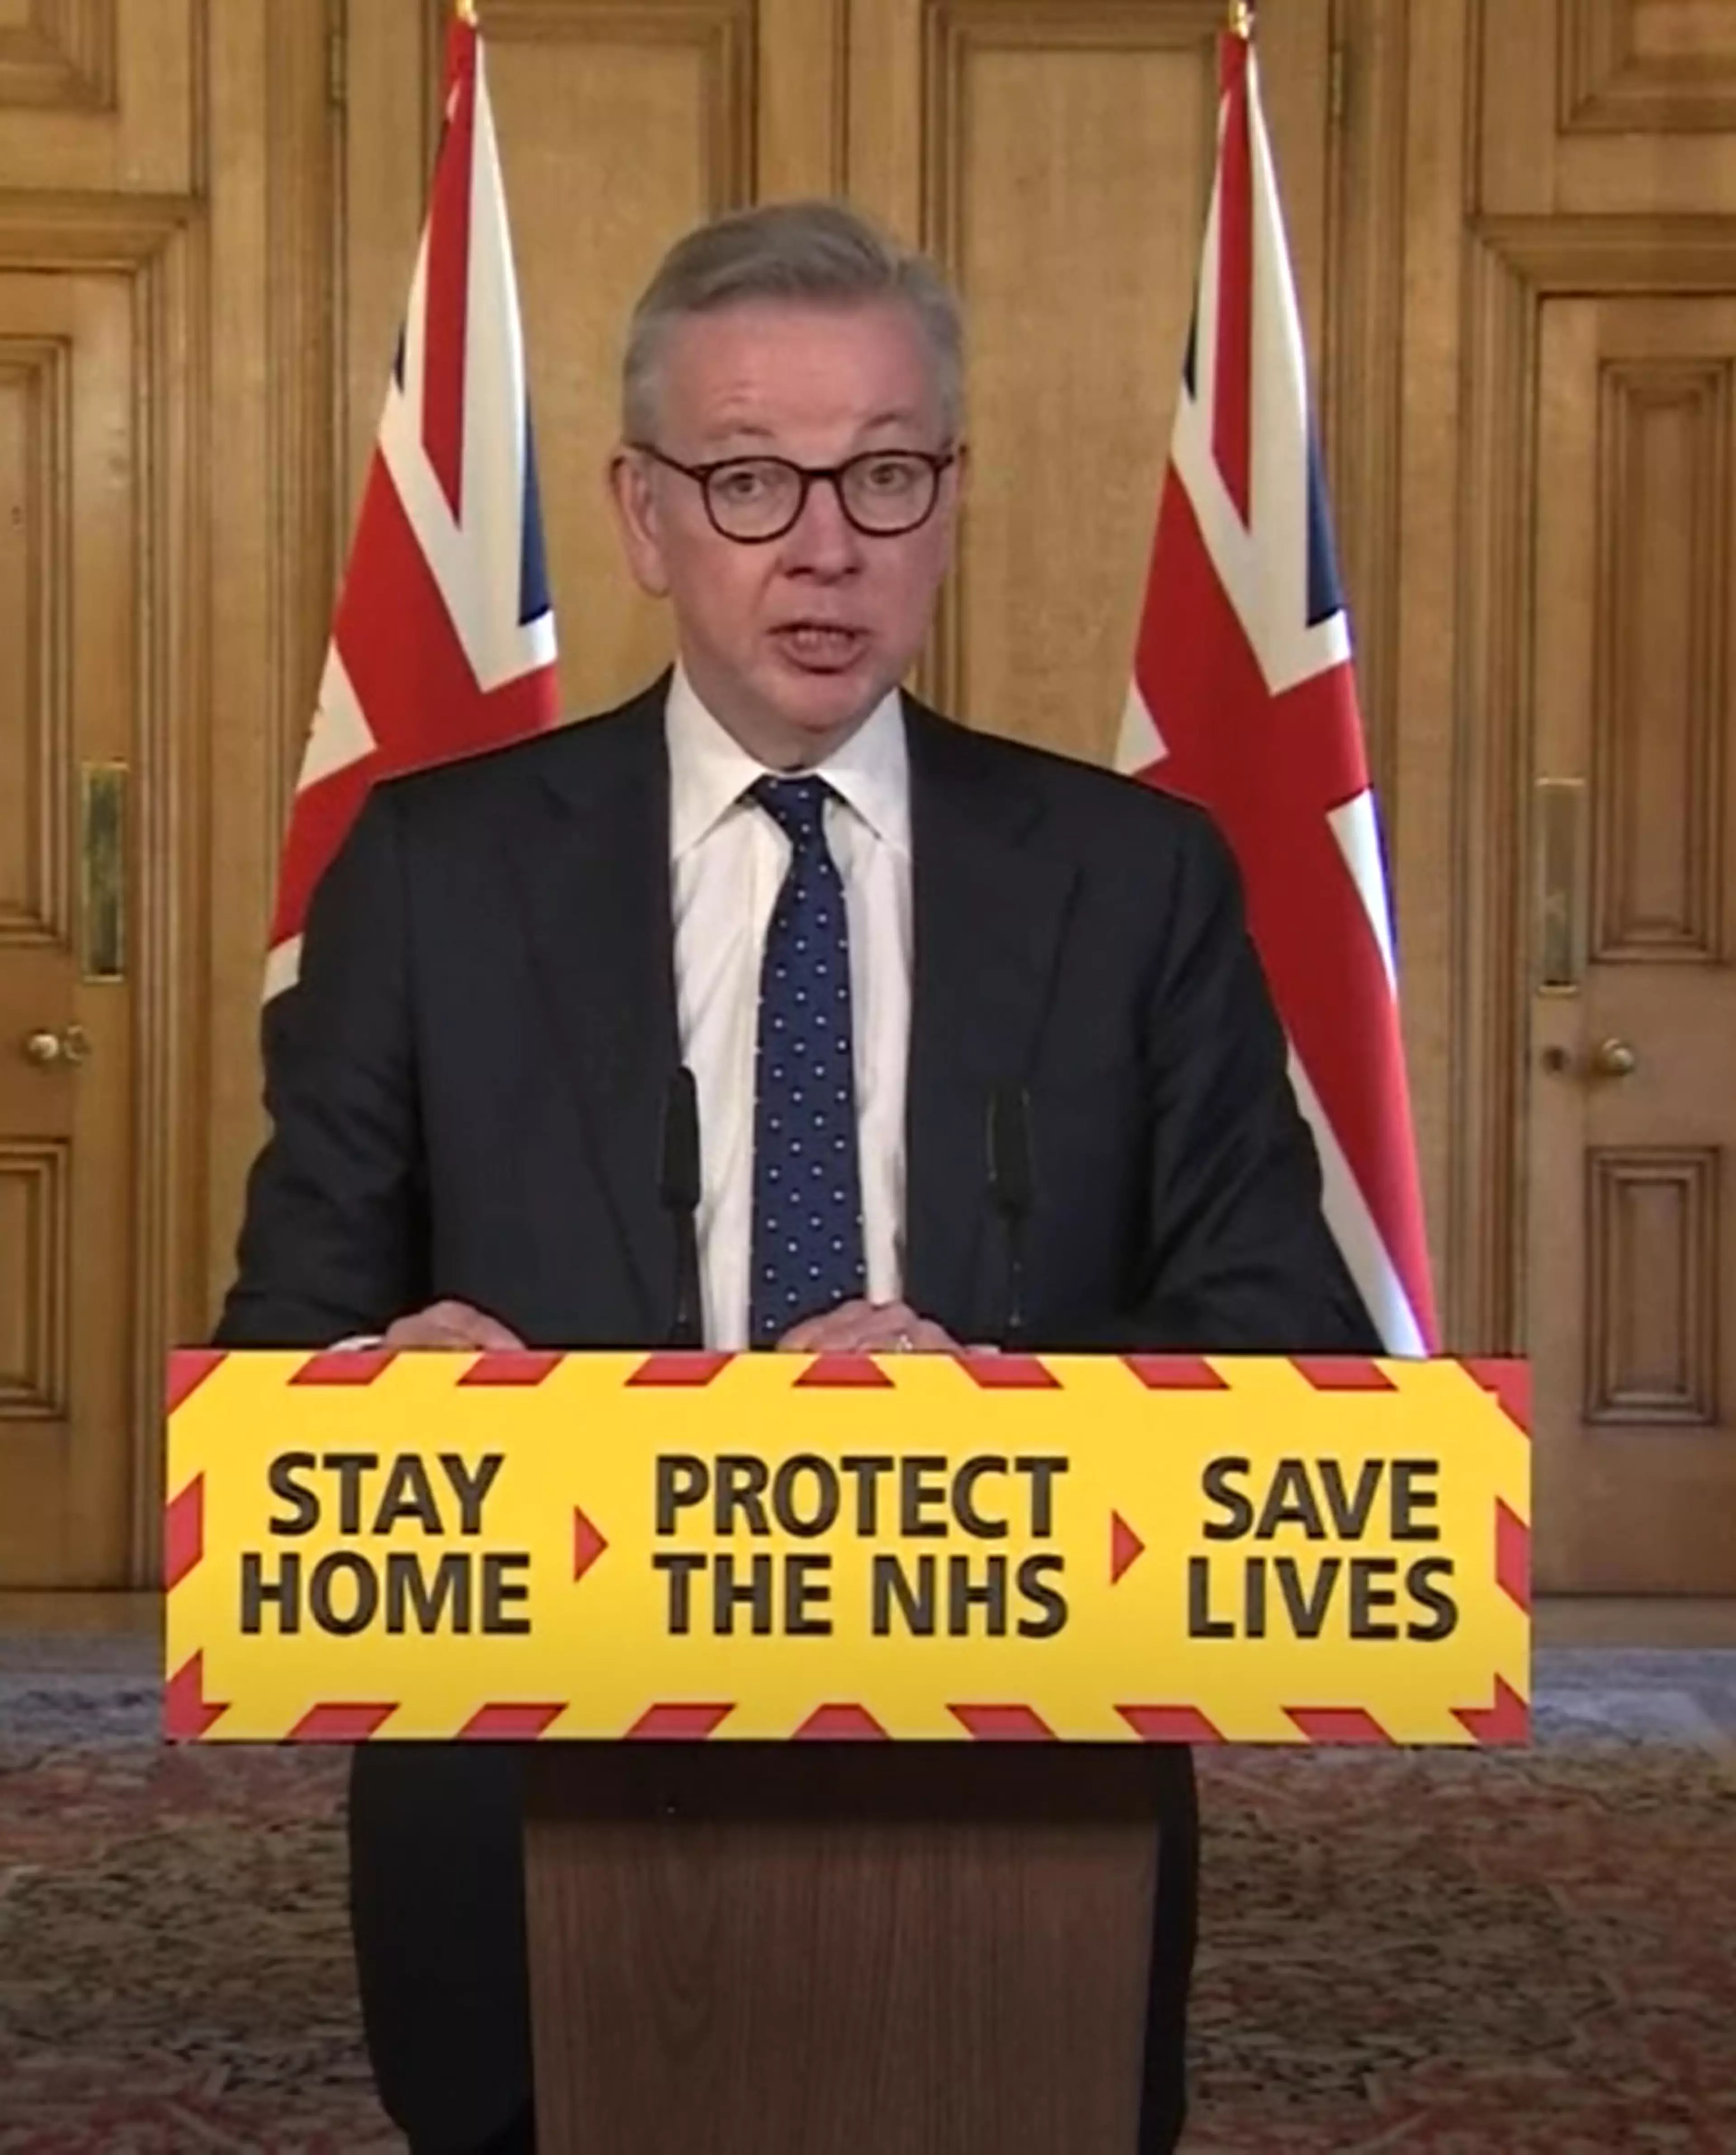 Mr Gove urged people to stay home this weekend.